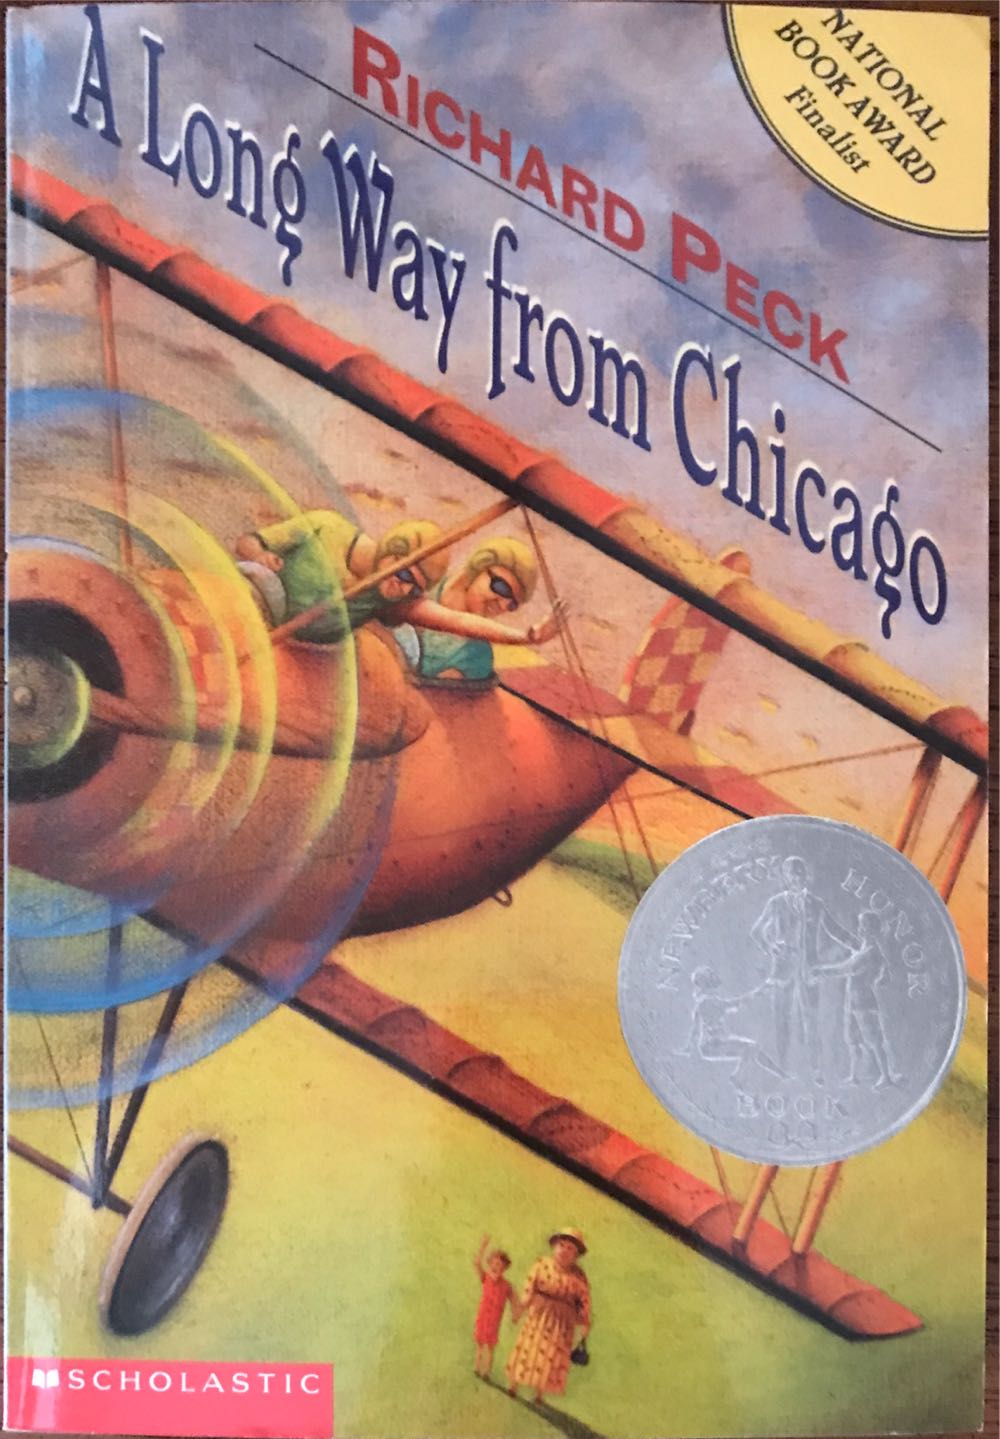 Long Way From Chicago, A - Richard Peck (Scholastic Inc. - Paperback) book collectible [Barcode 9780439240925] - Main Image 3